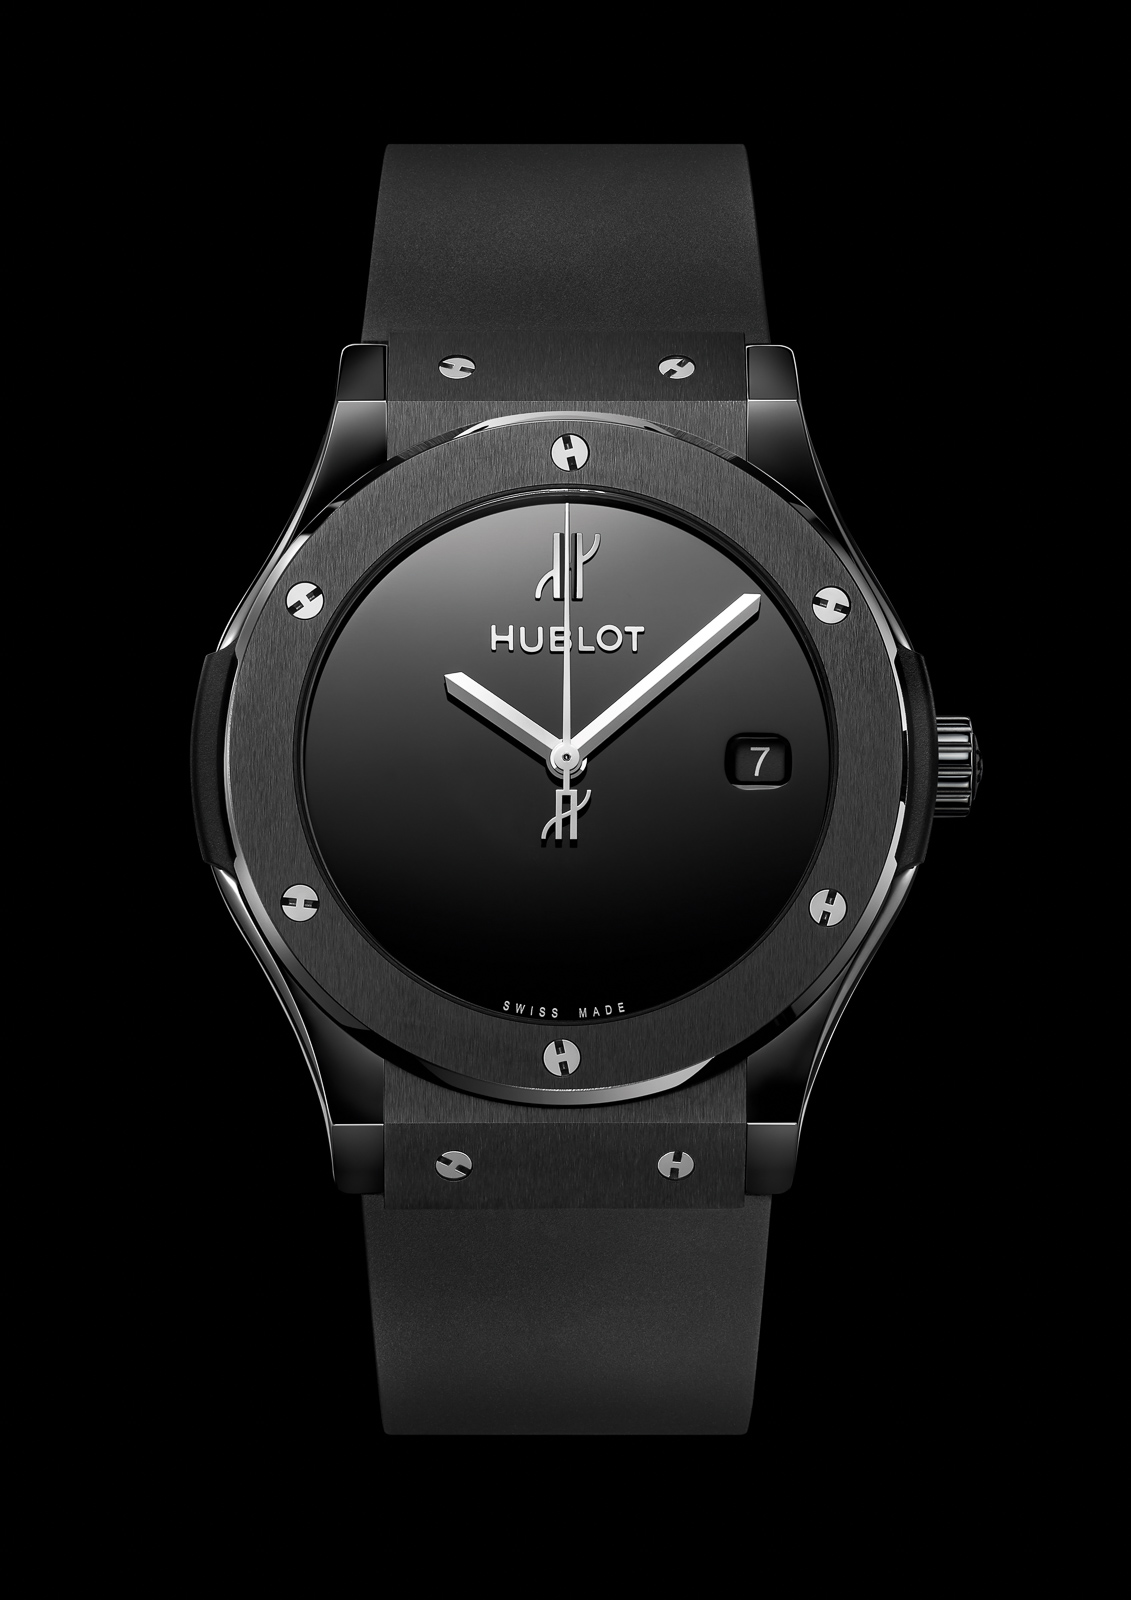 40 years in the making, the new Hublot Classic Fusion models are a ...